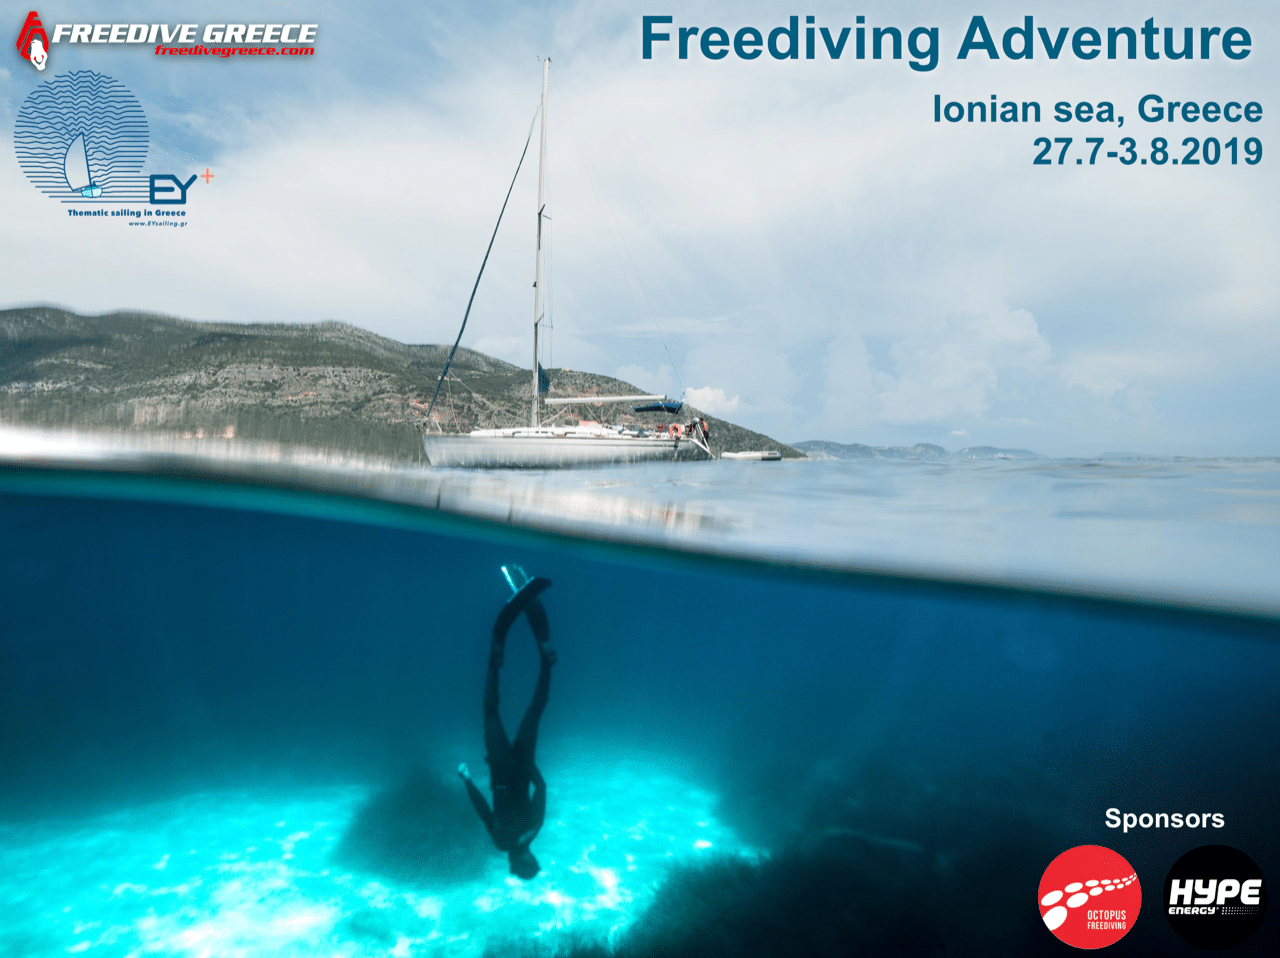 EYsailing and Freedive Greece are once again organizing a sailing trip this coming summer.